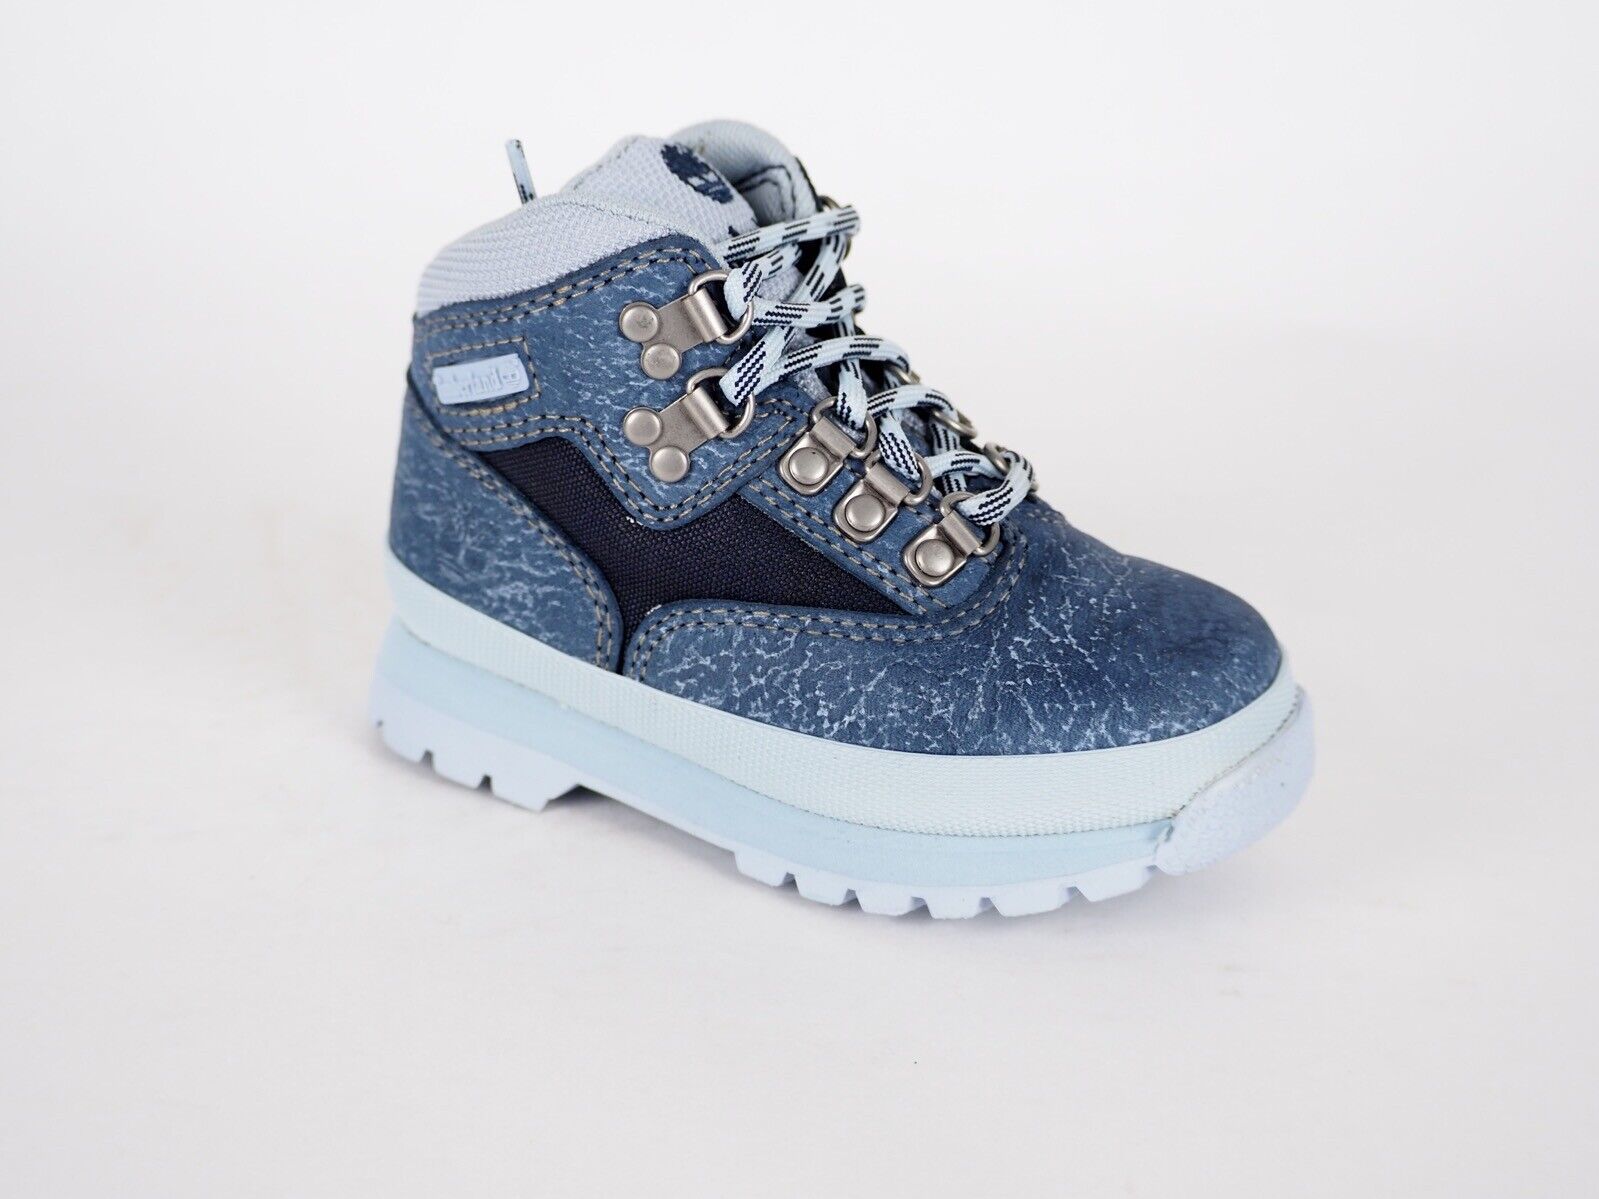 Boys Toddlers Timberland Euro Hiker A1AG2 Blue Leather Textile Lace Up Boots